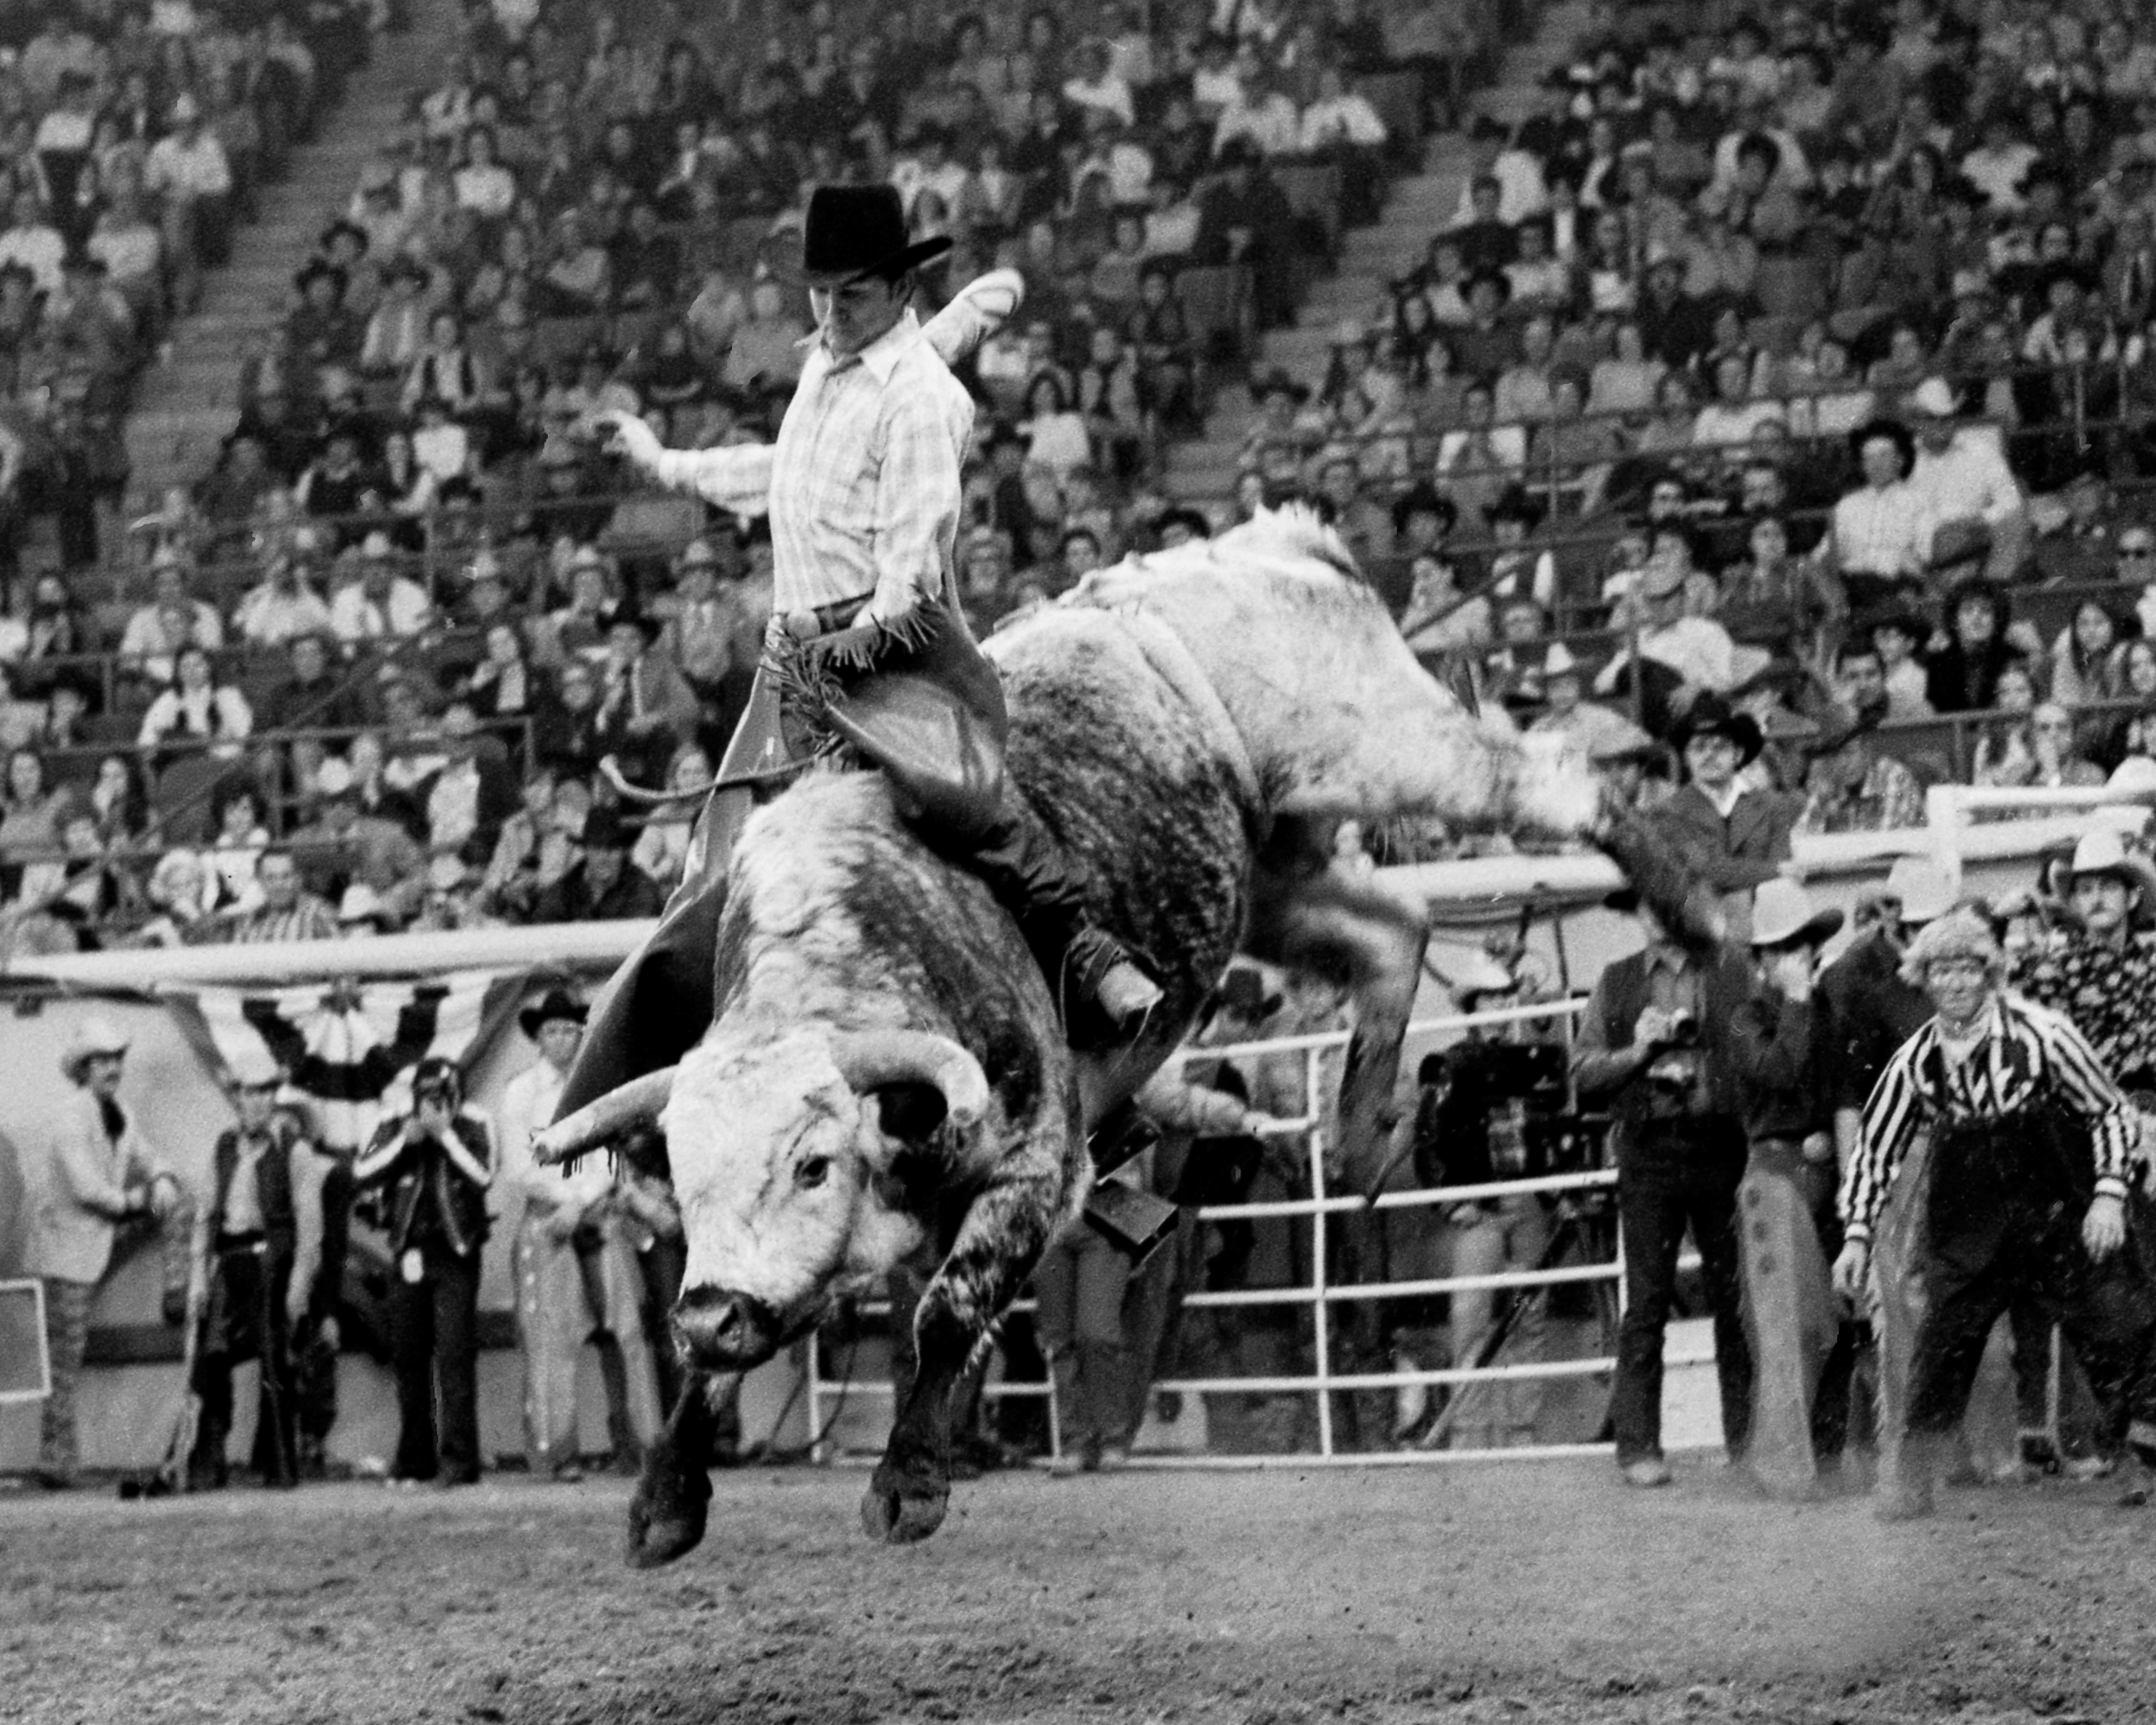 Born to ride: Bull riders and bullfighters share their passion for